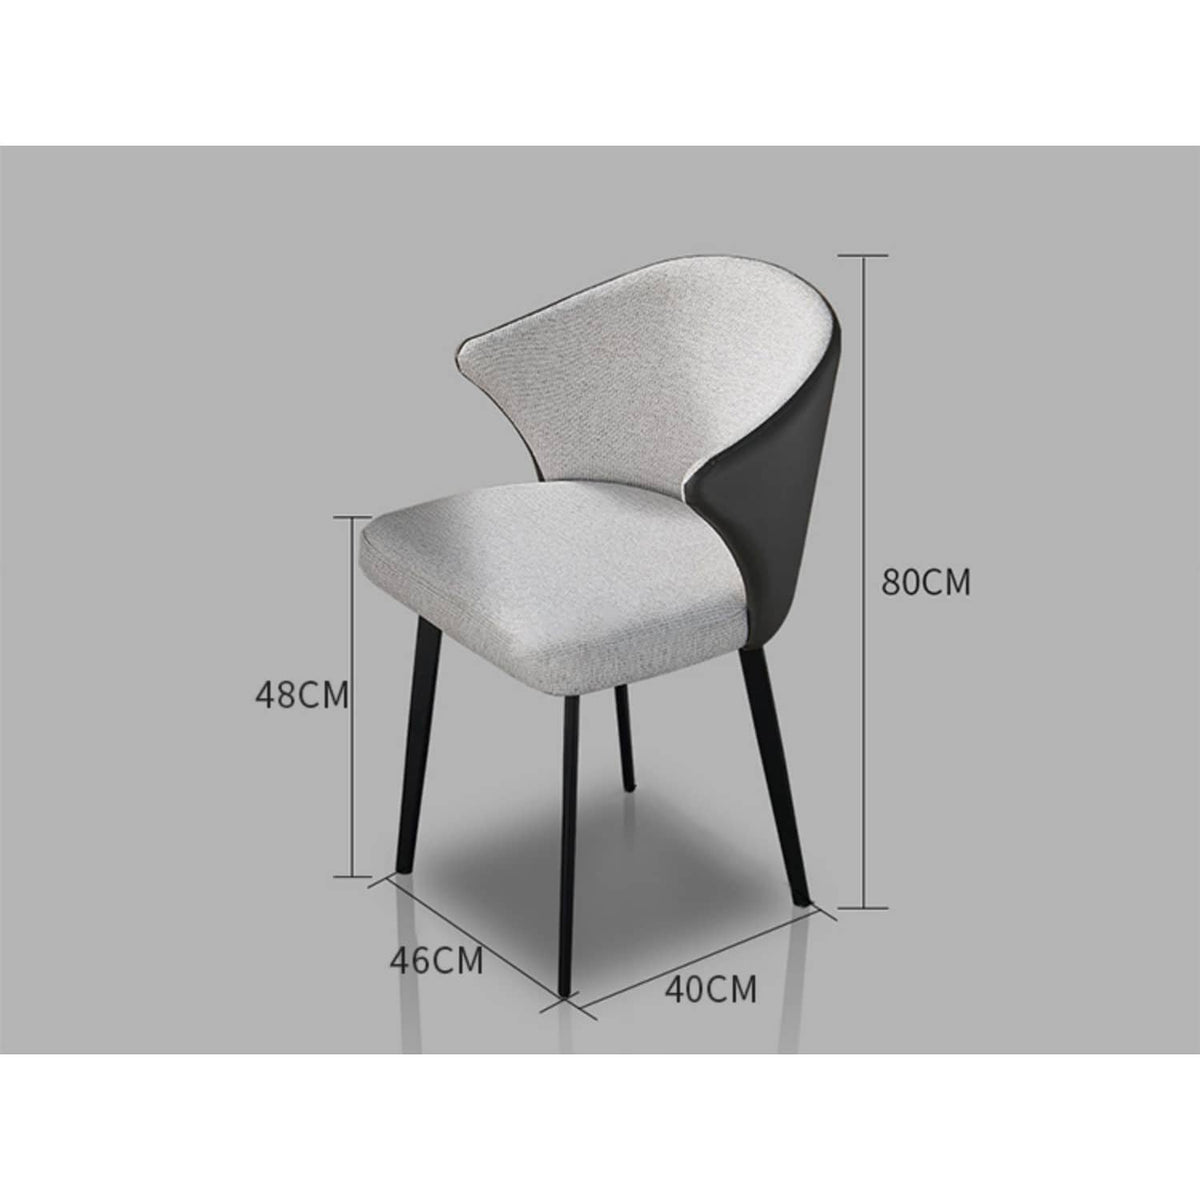 Stylish Light Gray Chair with Durable Cotton-Ramie Scratch-Resistant Fabric hagst-341